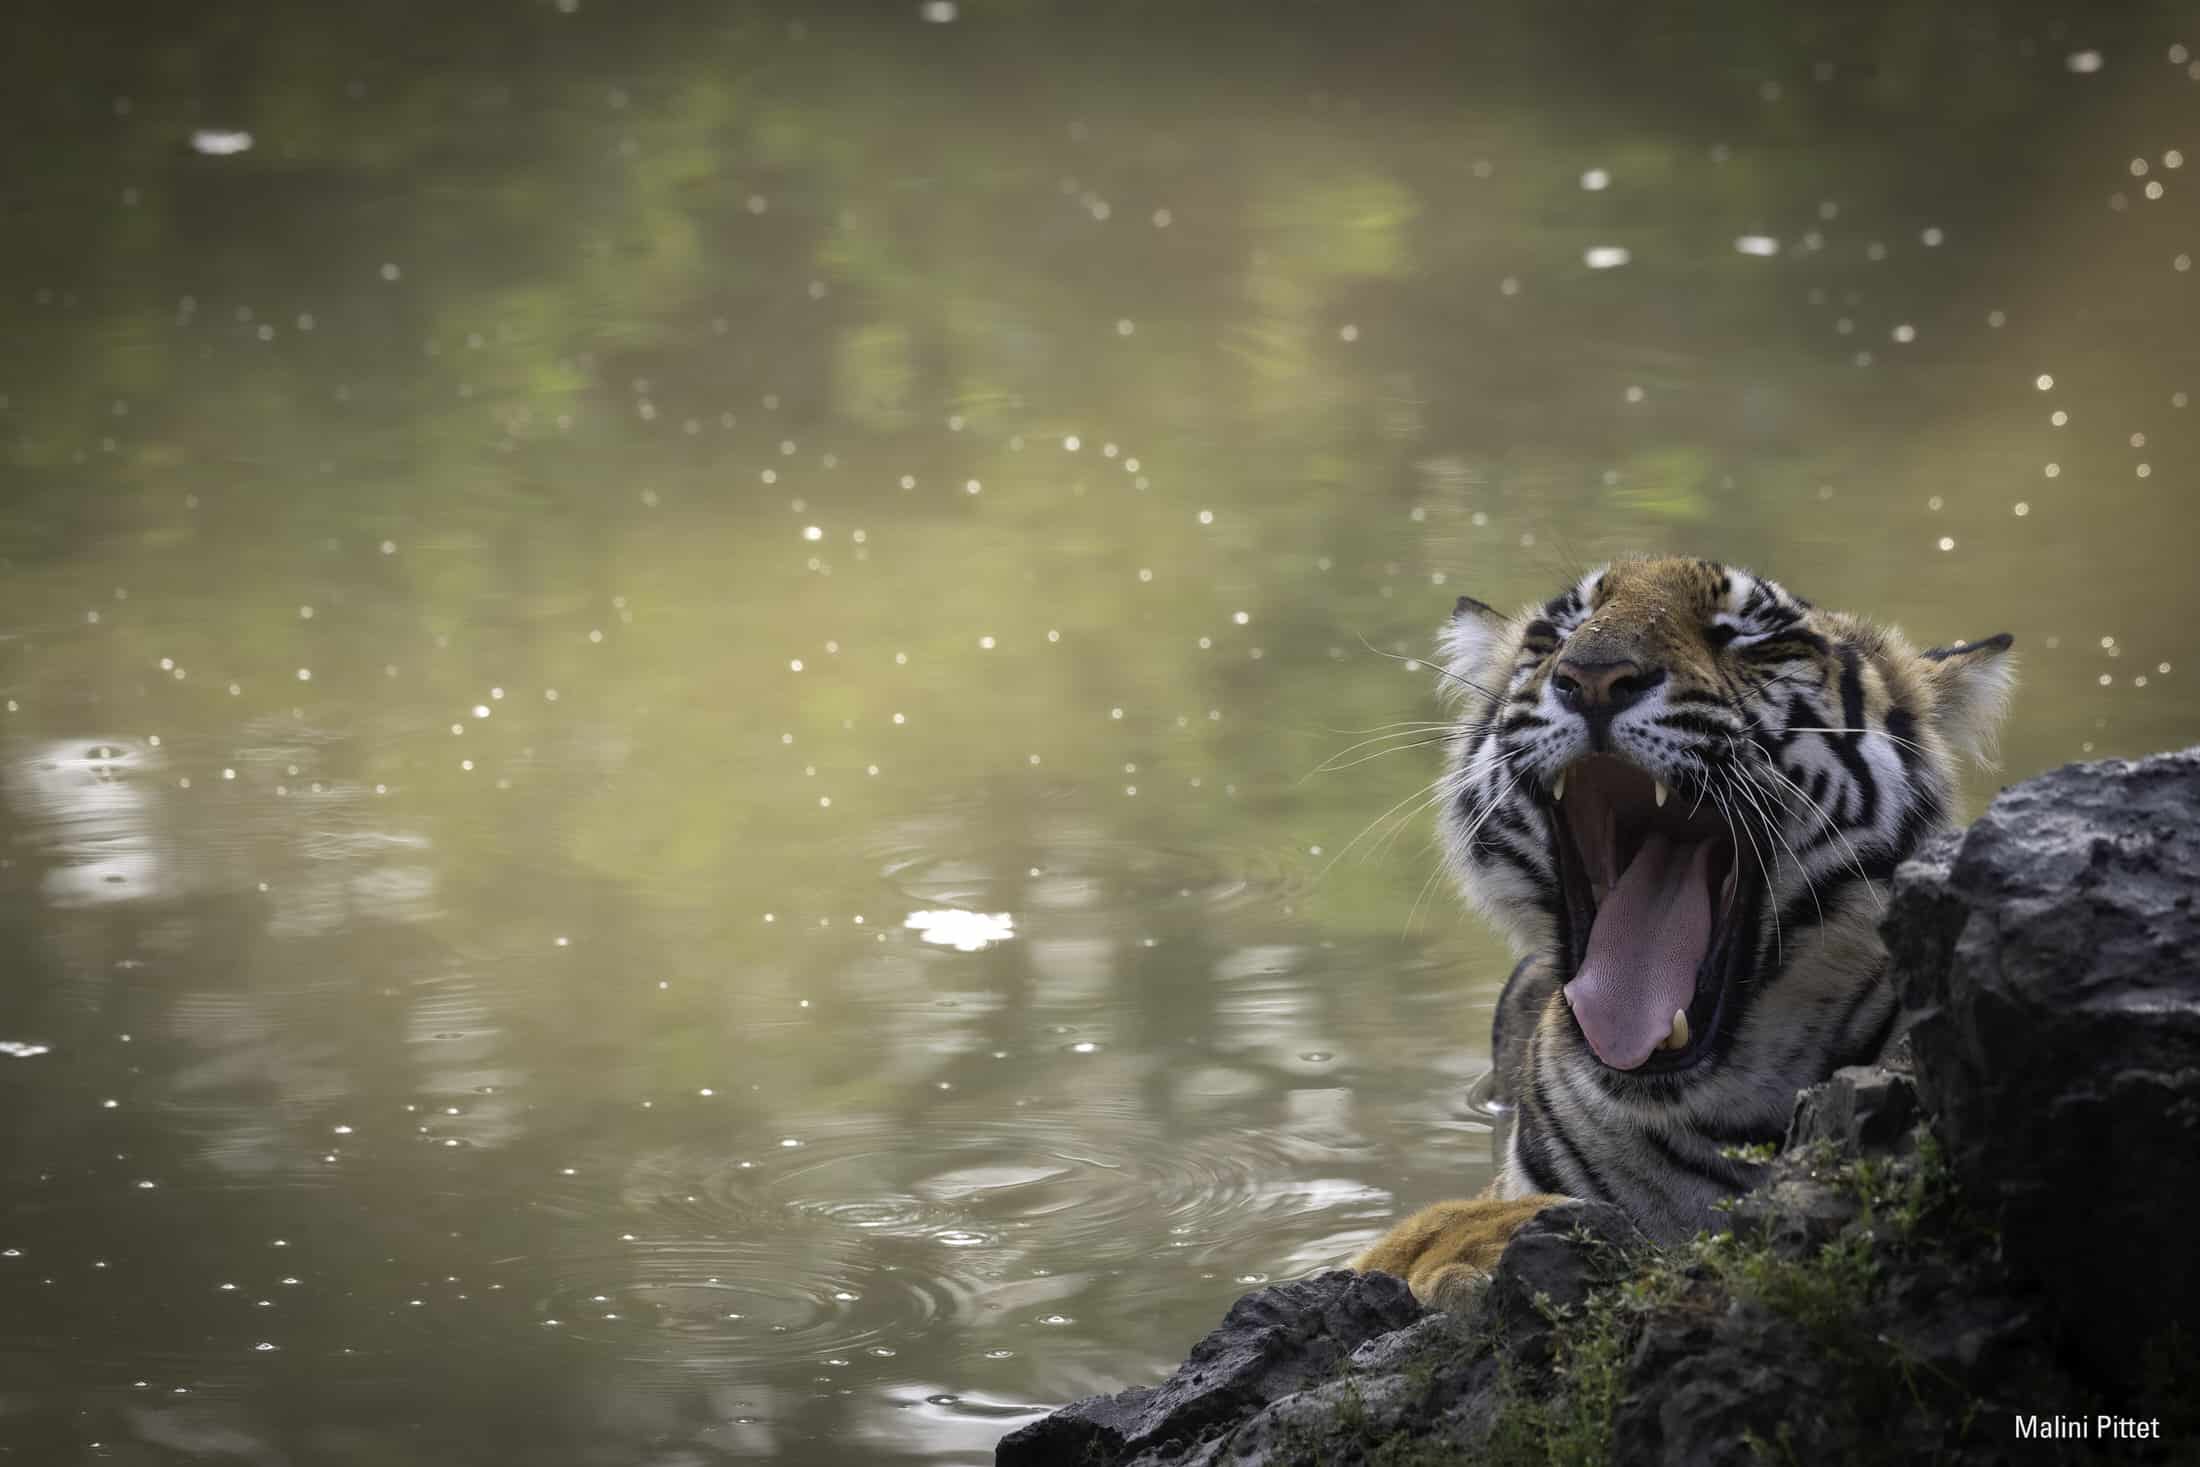 Wildlife Photography Gear recommendations - Tiger by Malini Pittet